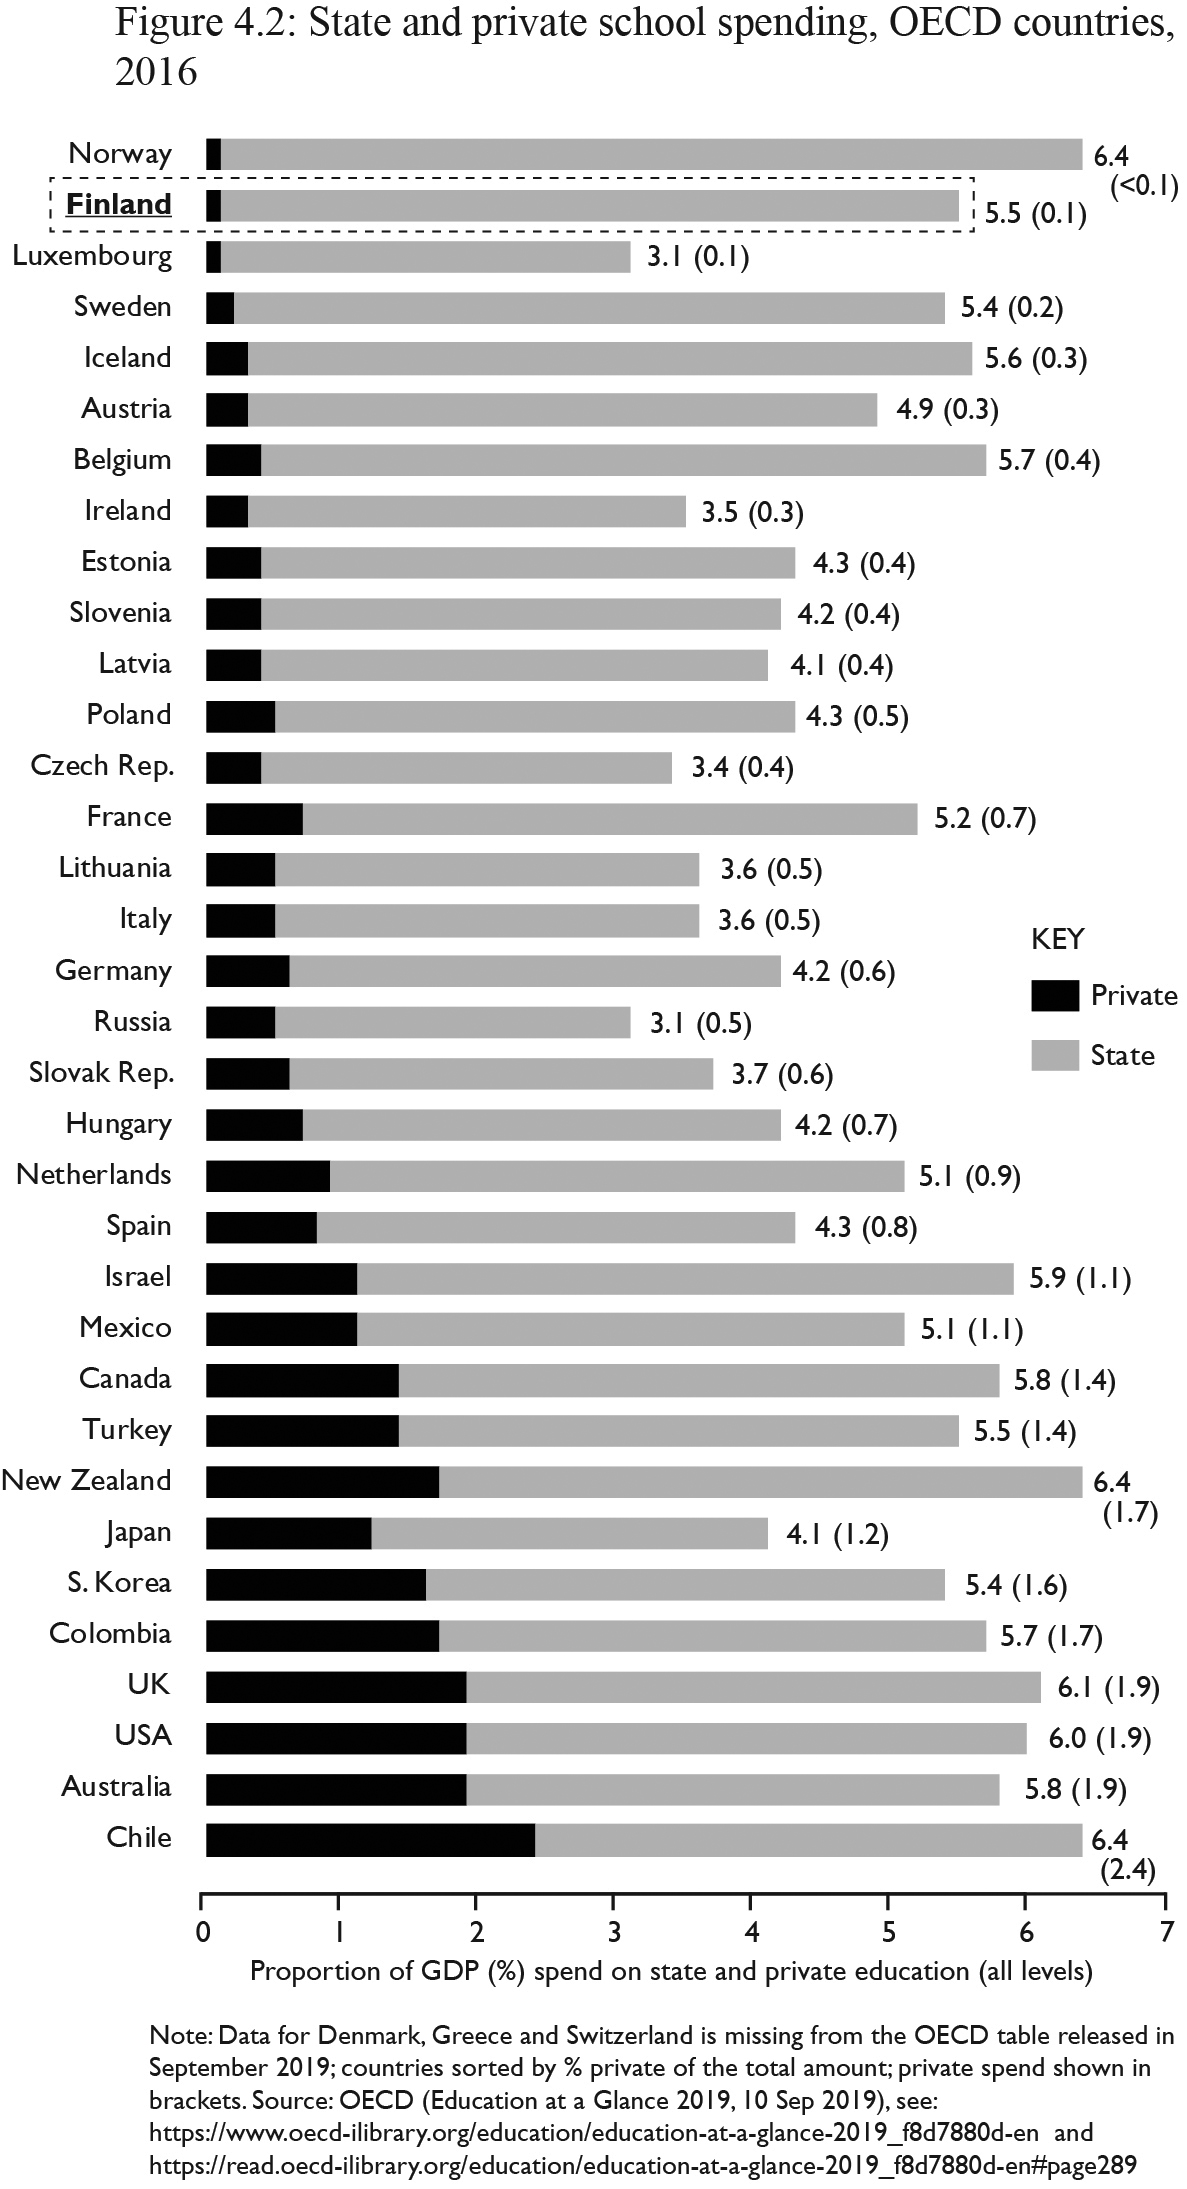 Figure 4.2: Note: Data for Denmark, Greece and Switzerland is missing from the OECD table released in September 2019; countries sorted by % private of the total amount.
Source: OECD (2019c) Education at a Glance 2019, 10 Sep 2019, https://www.oecd-ilibrary.org/education/education-at-a-glance-2019_f8d7880d-en
https://read.oecd-ilibrary.org/education/education-at-a-glance-2019_f8d7880d-en#page289